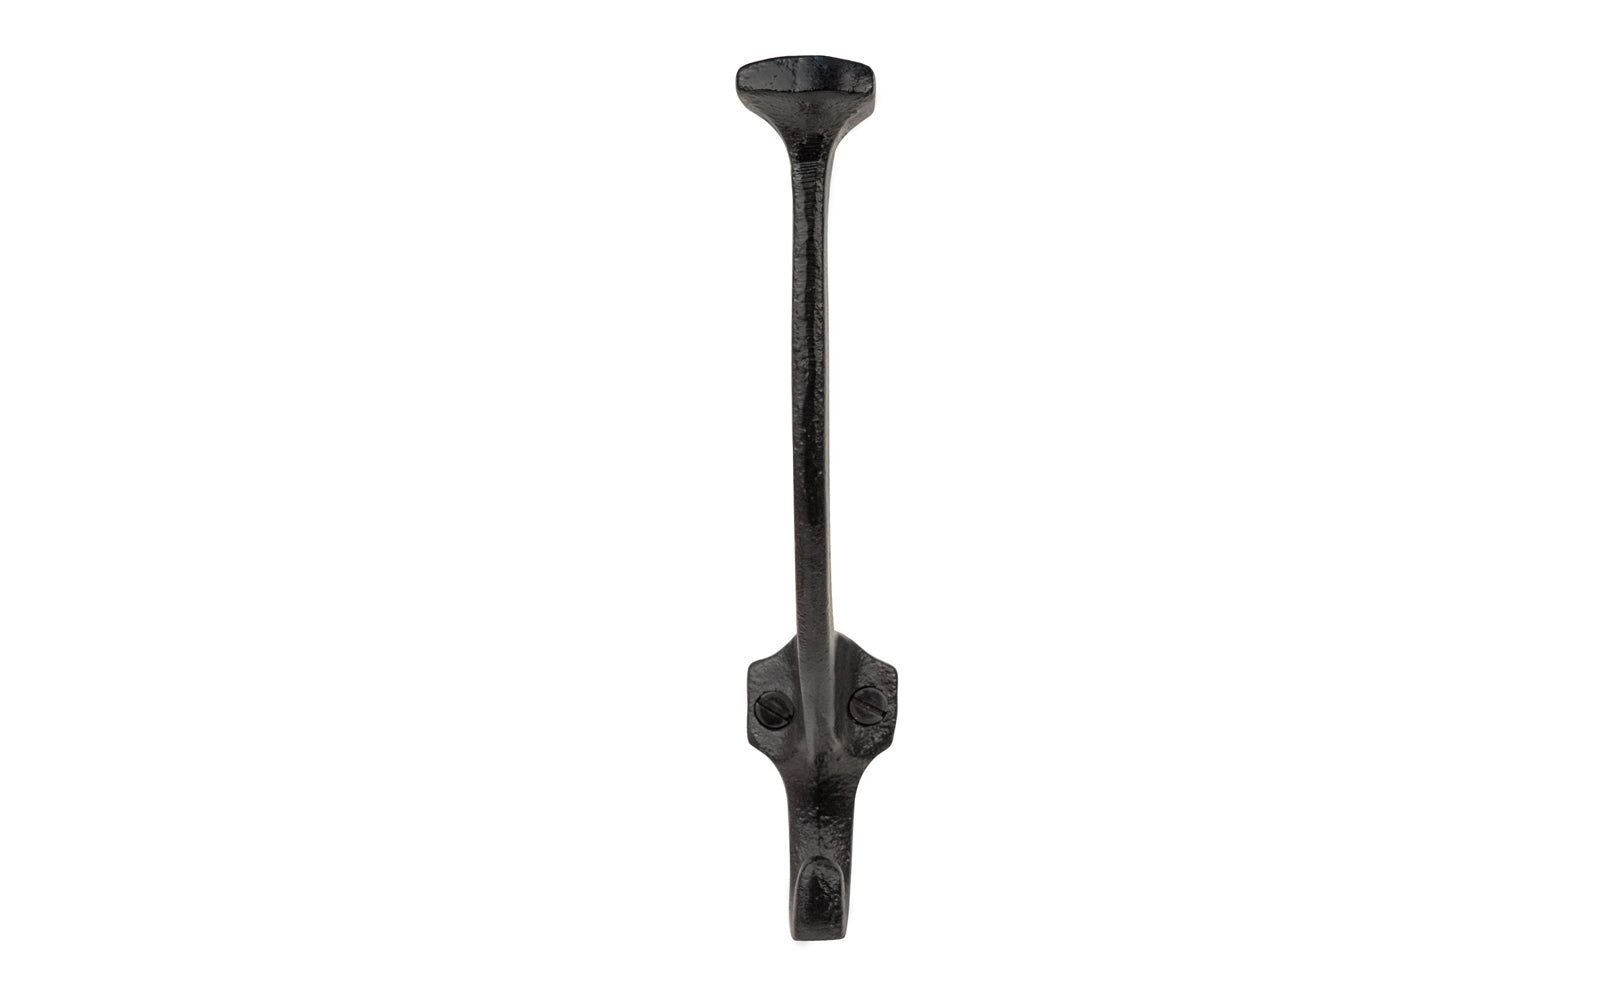 Vintage-style Hardware · A traditional Mission-Style Black Cast Iron Hall Tree Hook. Great for use in hallways, hall trees, coat racks, kitchens, bedrooms. The hook is made of strong cast iron material, making it durable for heavy coats, bags, & clothing. It also has a double hook, good for hanging multiple items.